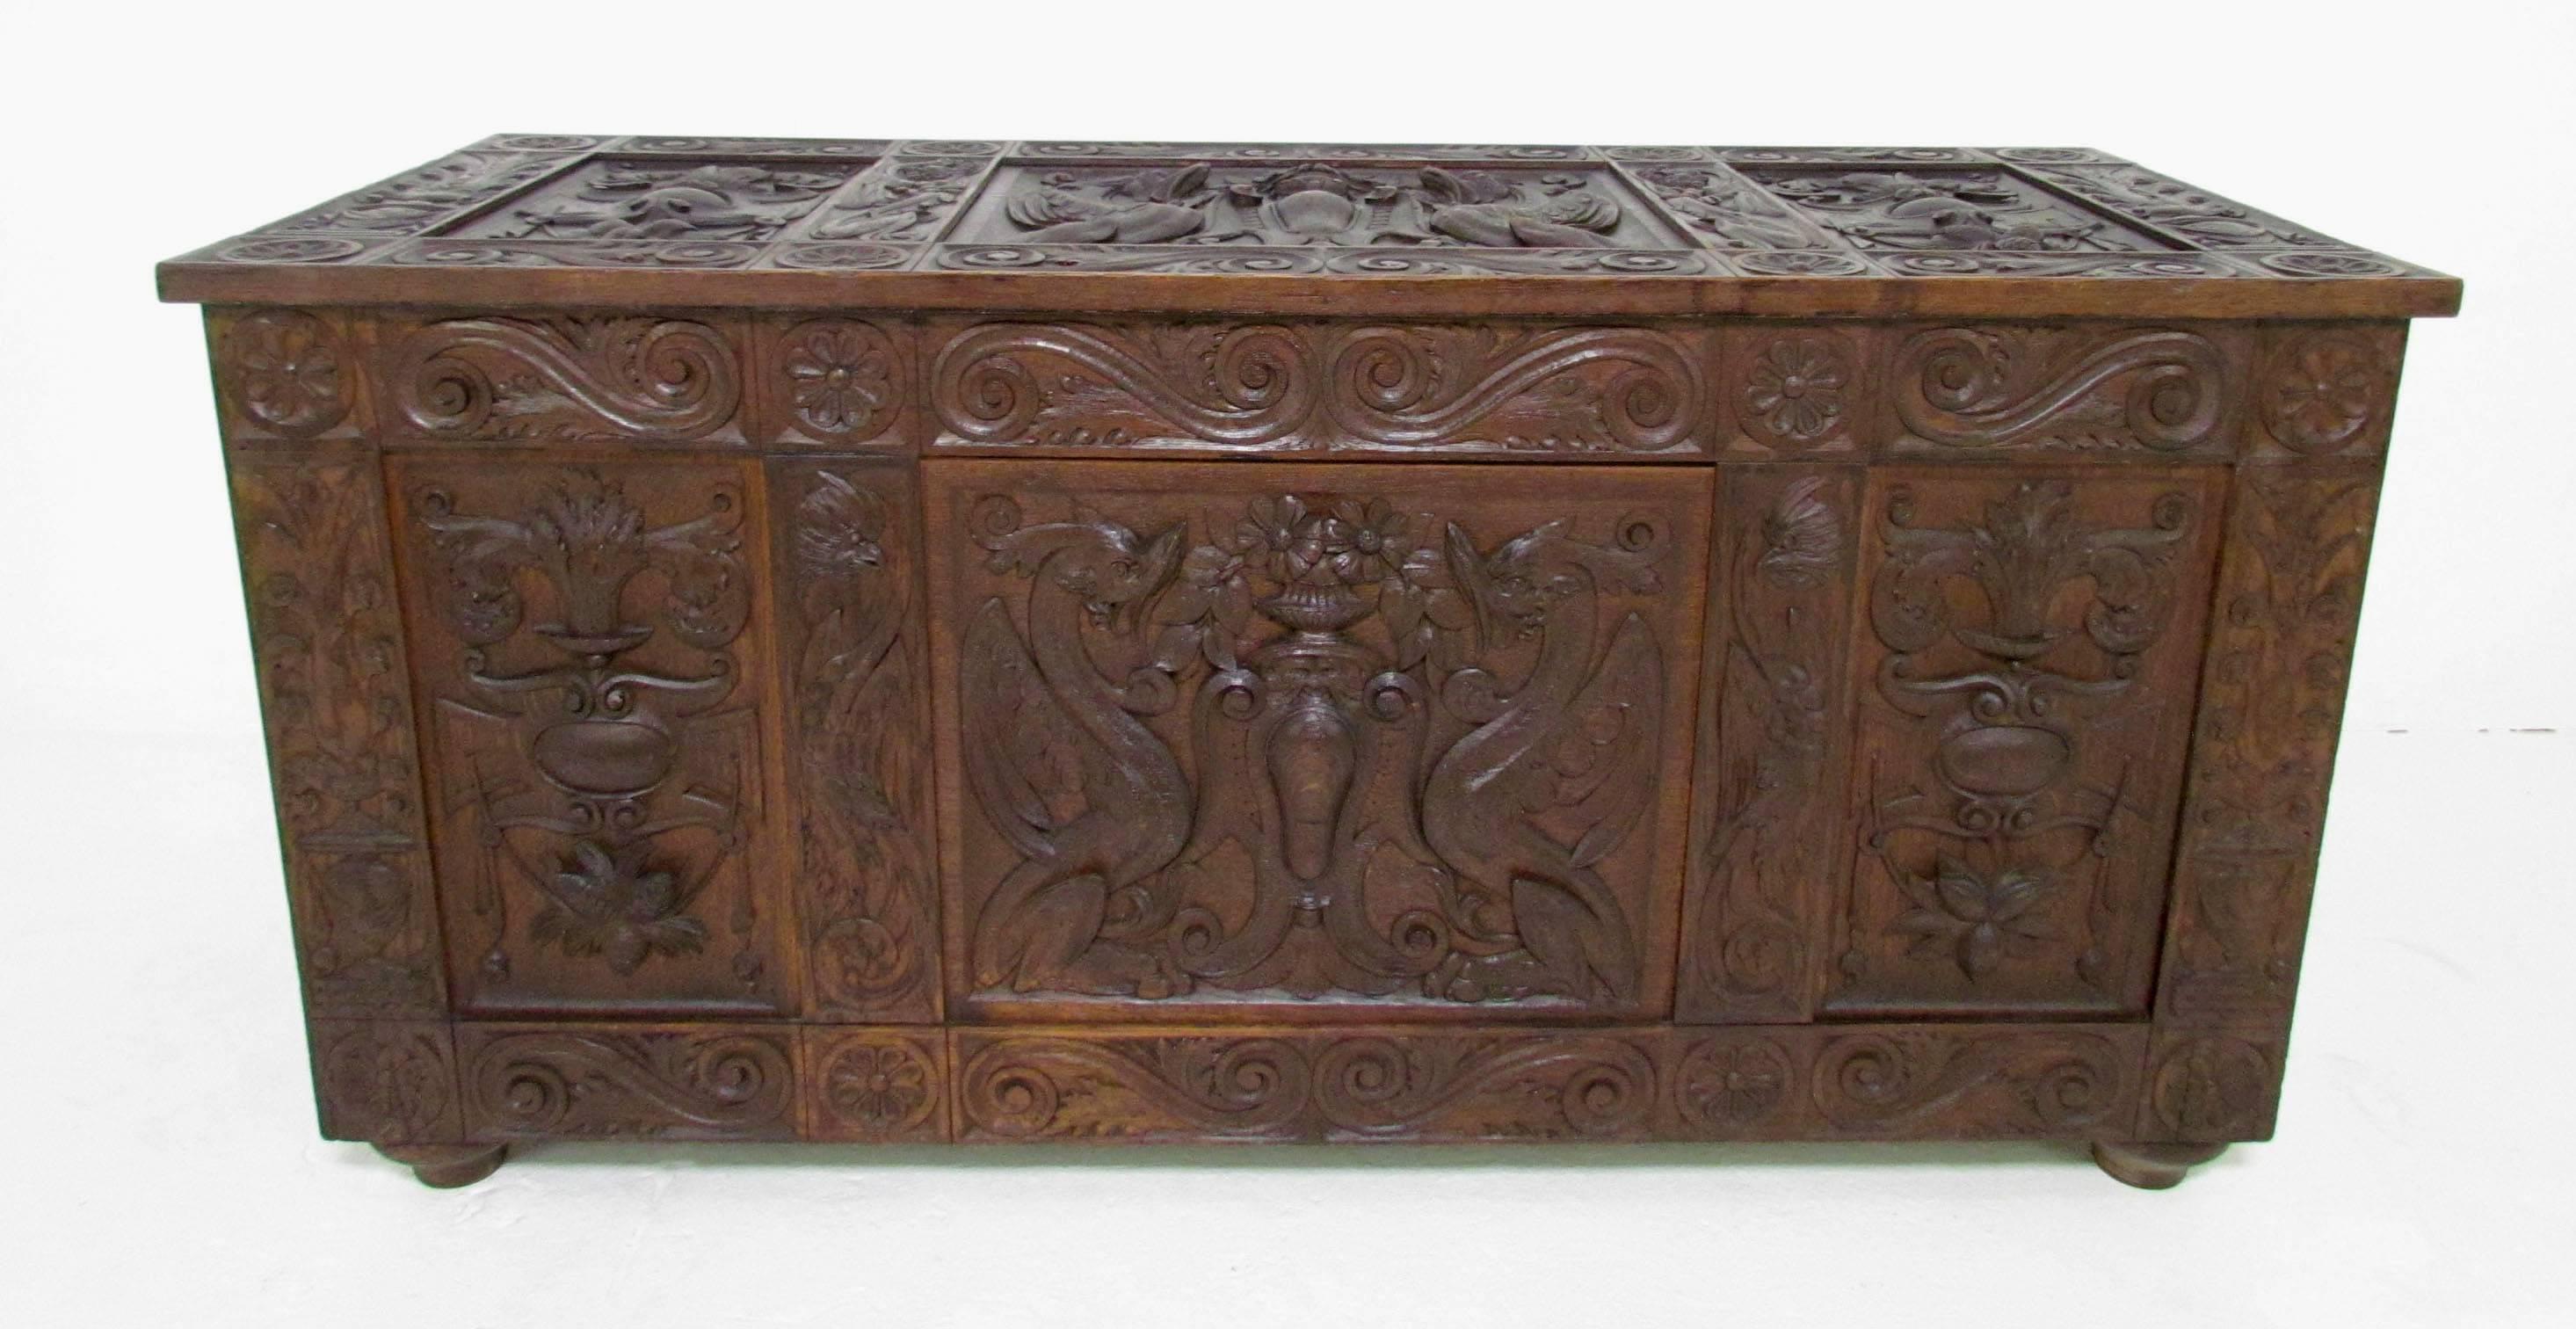 Exceptional 19th century baroque revival Italian cassone or wedding chest. Meticulously hand carved top and side panels decorated with mythological depictions of a central pair of Griffins flanking an urn of flowers as well as the heads of birds and